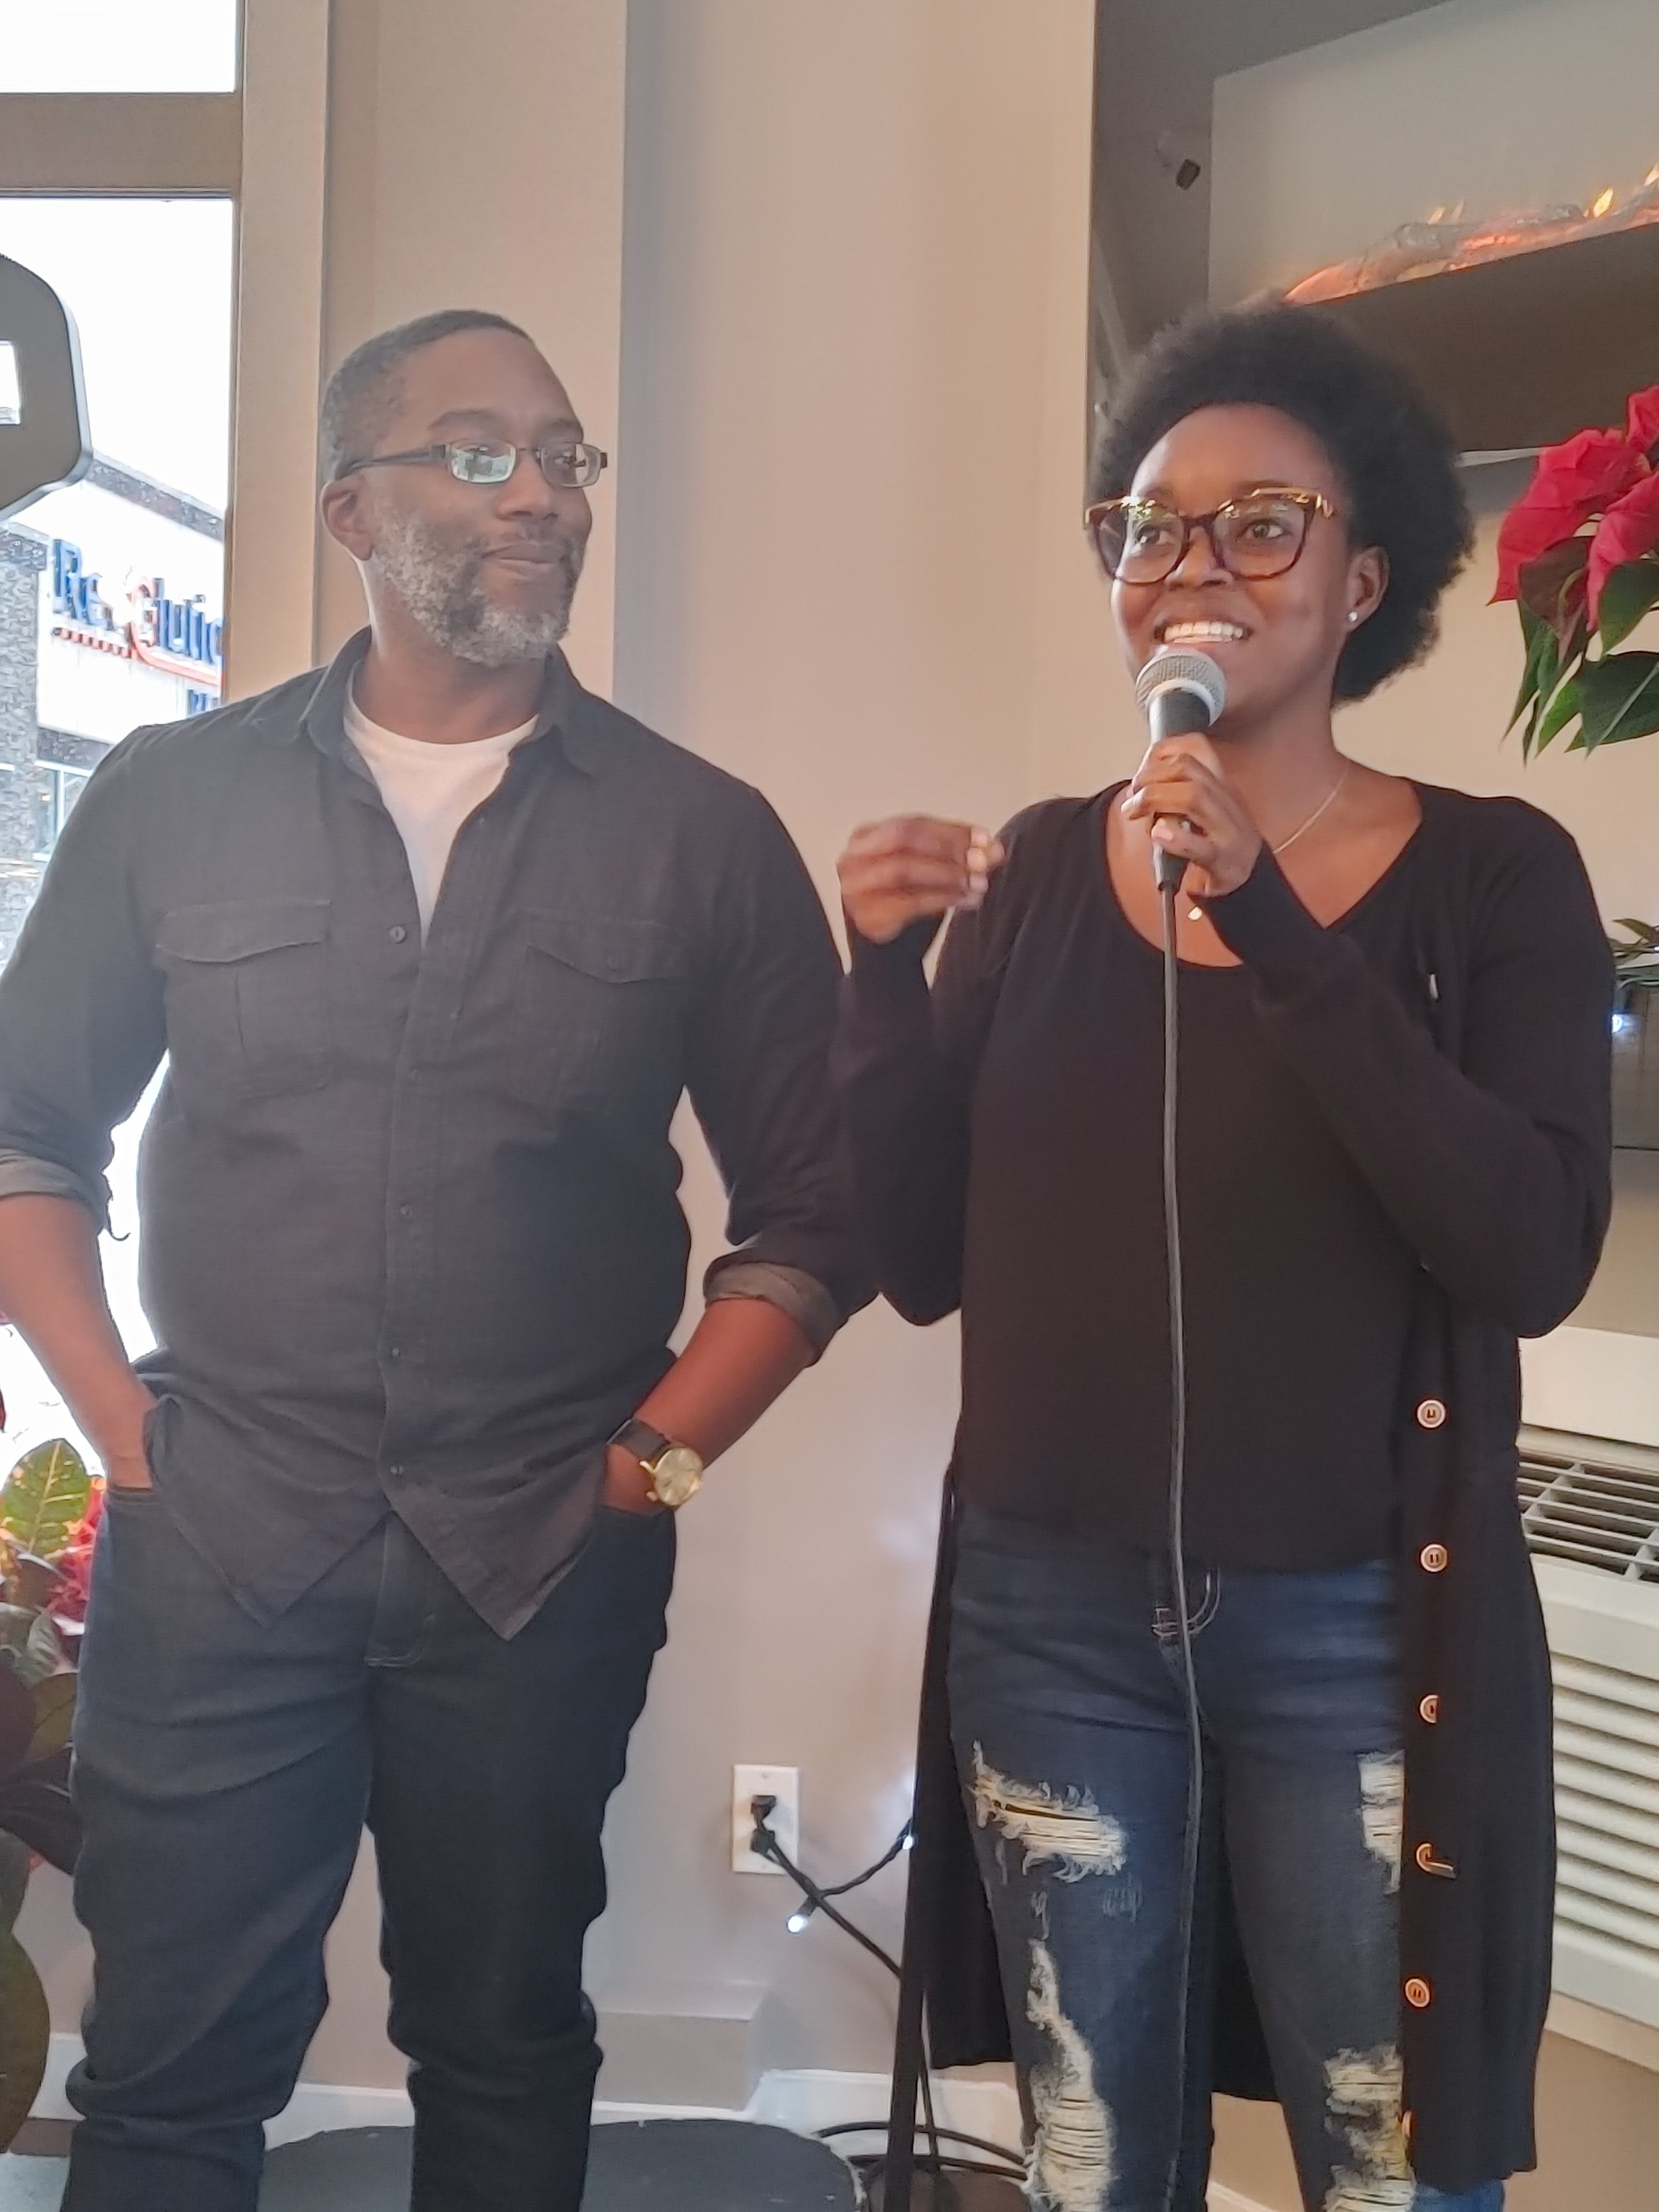   From left to right:  Jason, co-owner of  Diaspora cafe  (with his wife Keisha-not pictured) and Valerie, owner of Tusome Books saying their vote of thanks. 